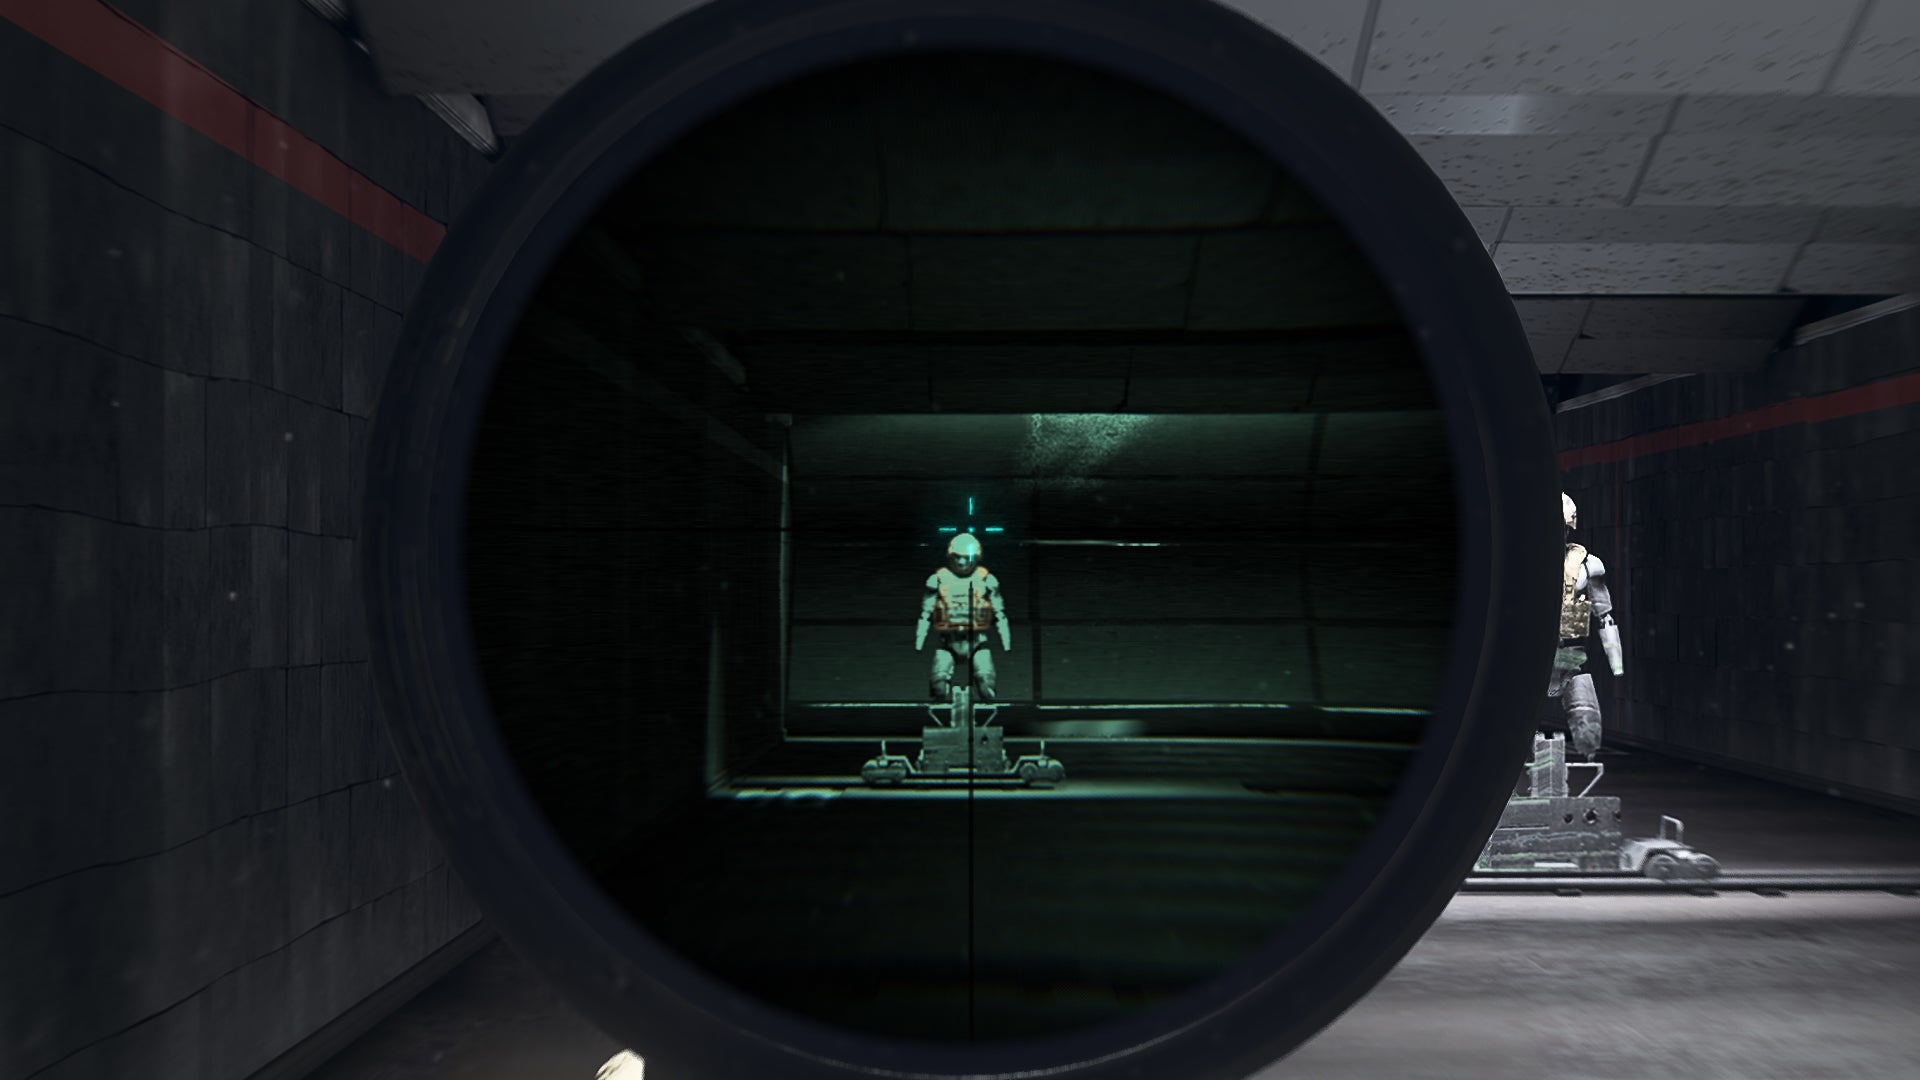 The player in Warzone 2.0 aims at a training dummy using the SZ Heatsource 800 optic attachment.